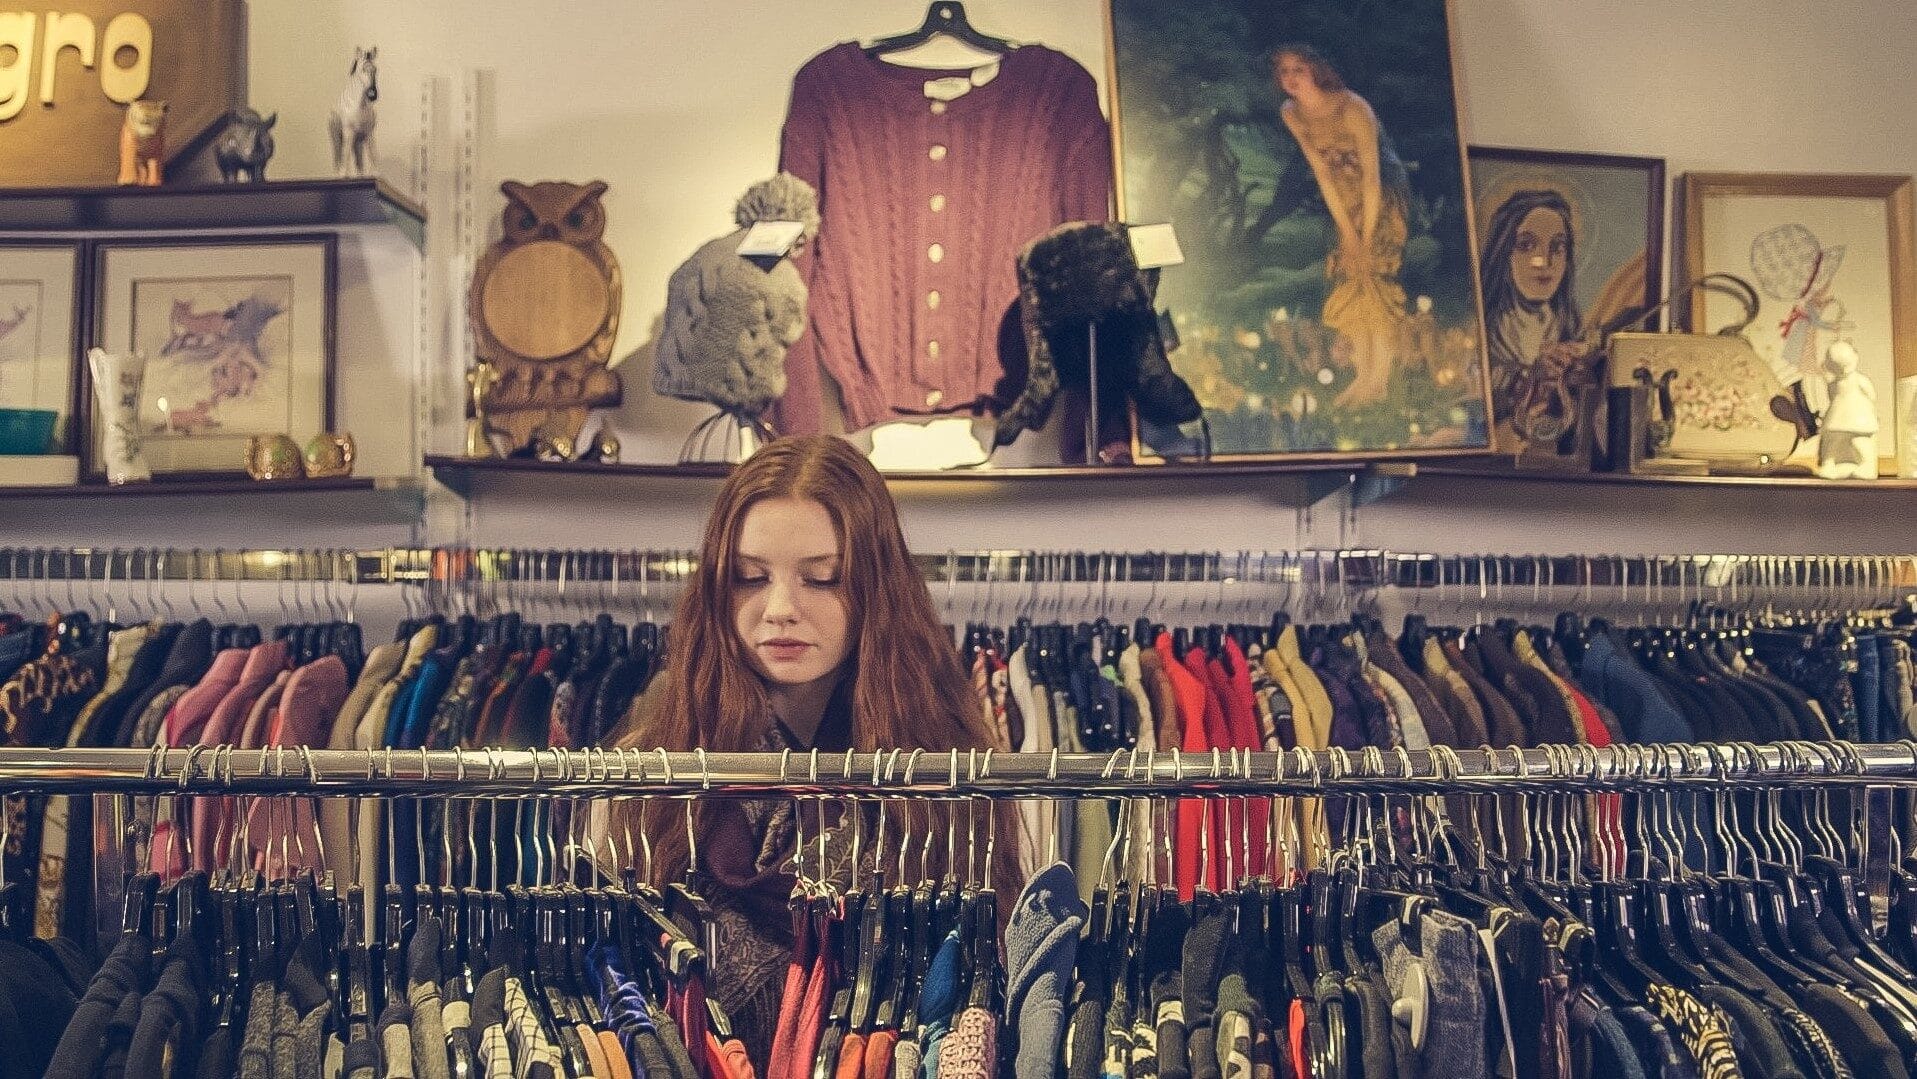 Image: woman sifting through clothes at a vintage clothing store